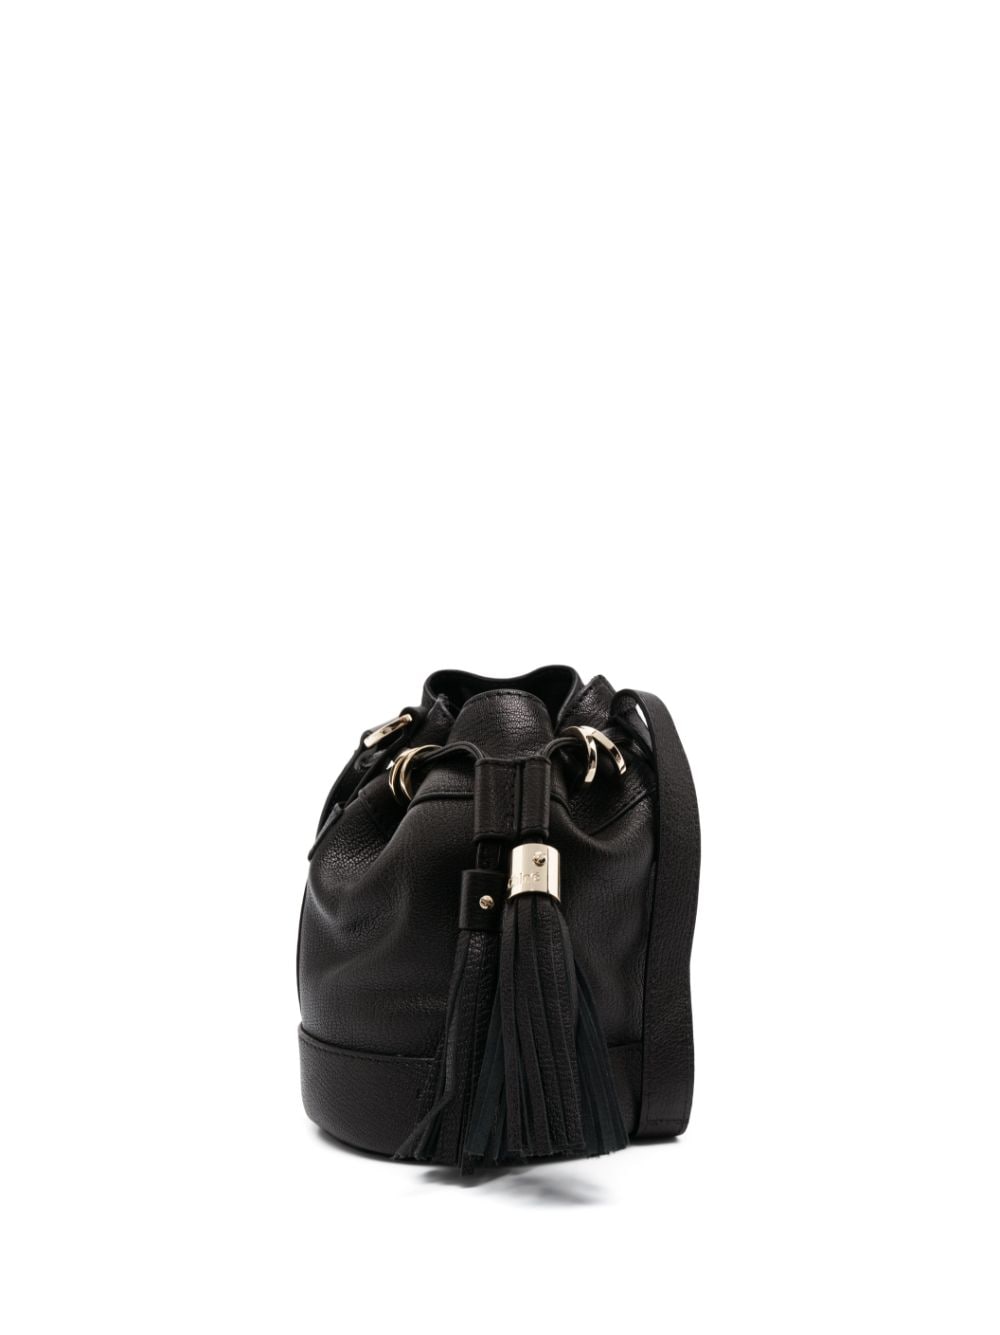 See by Chloé small Vicki leather bucket bag - Black